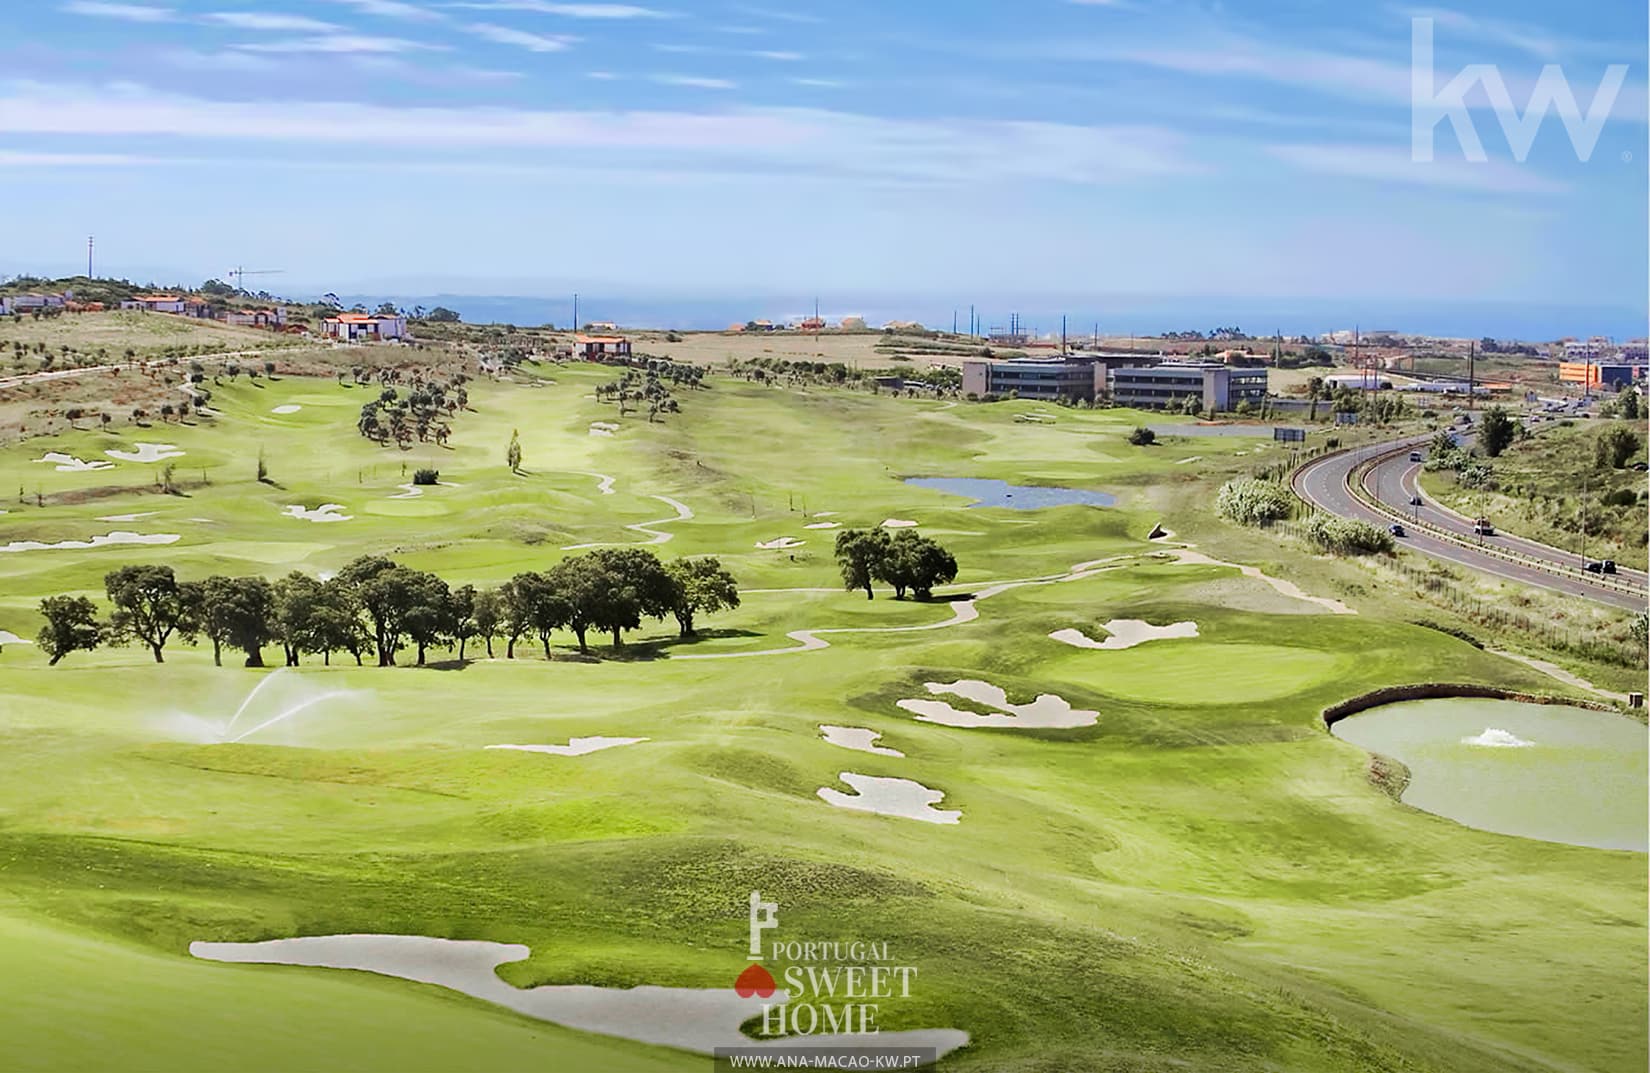 Oeiras Golf with 9 holes (18 in the future)